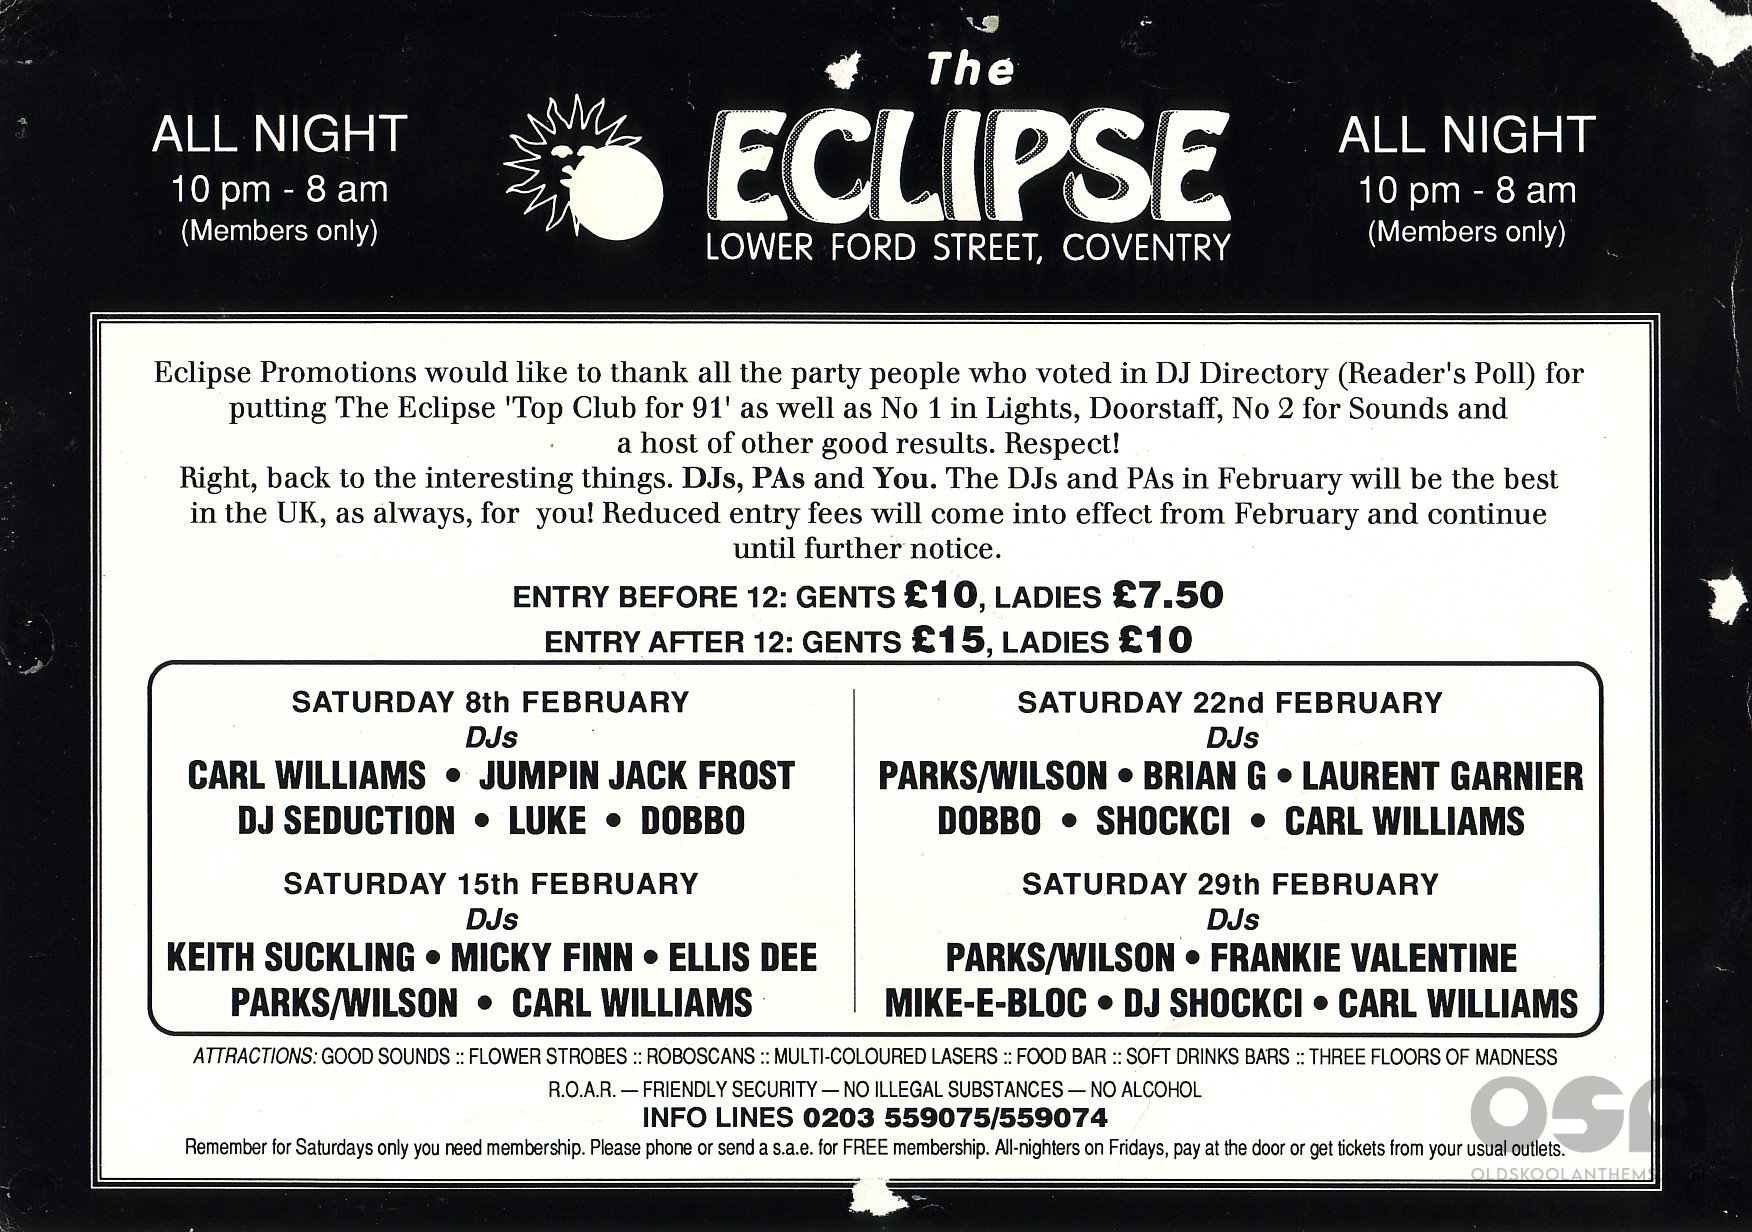 1_The_Eclipse_Coventry_Feb_Dates_92_rear_view.jpg